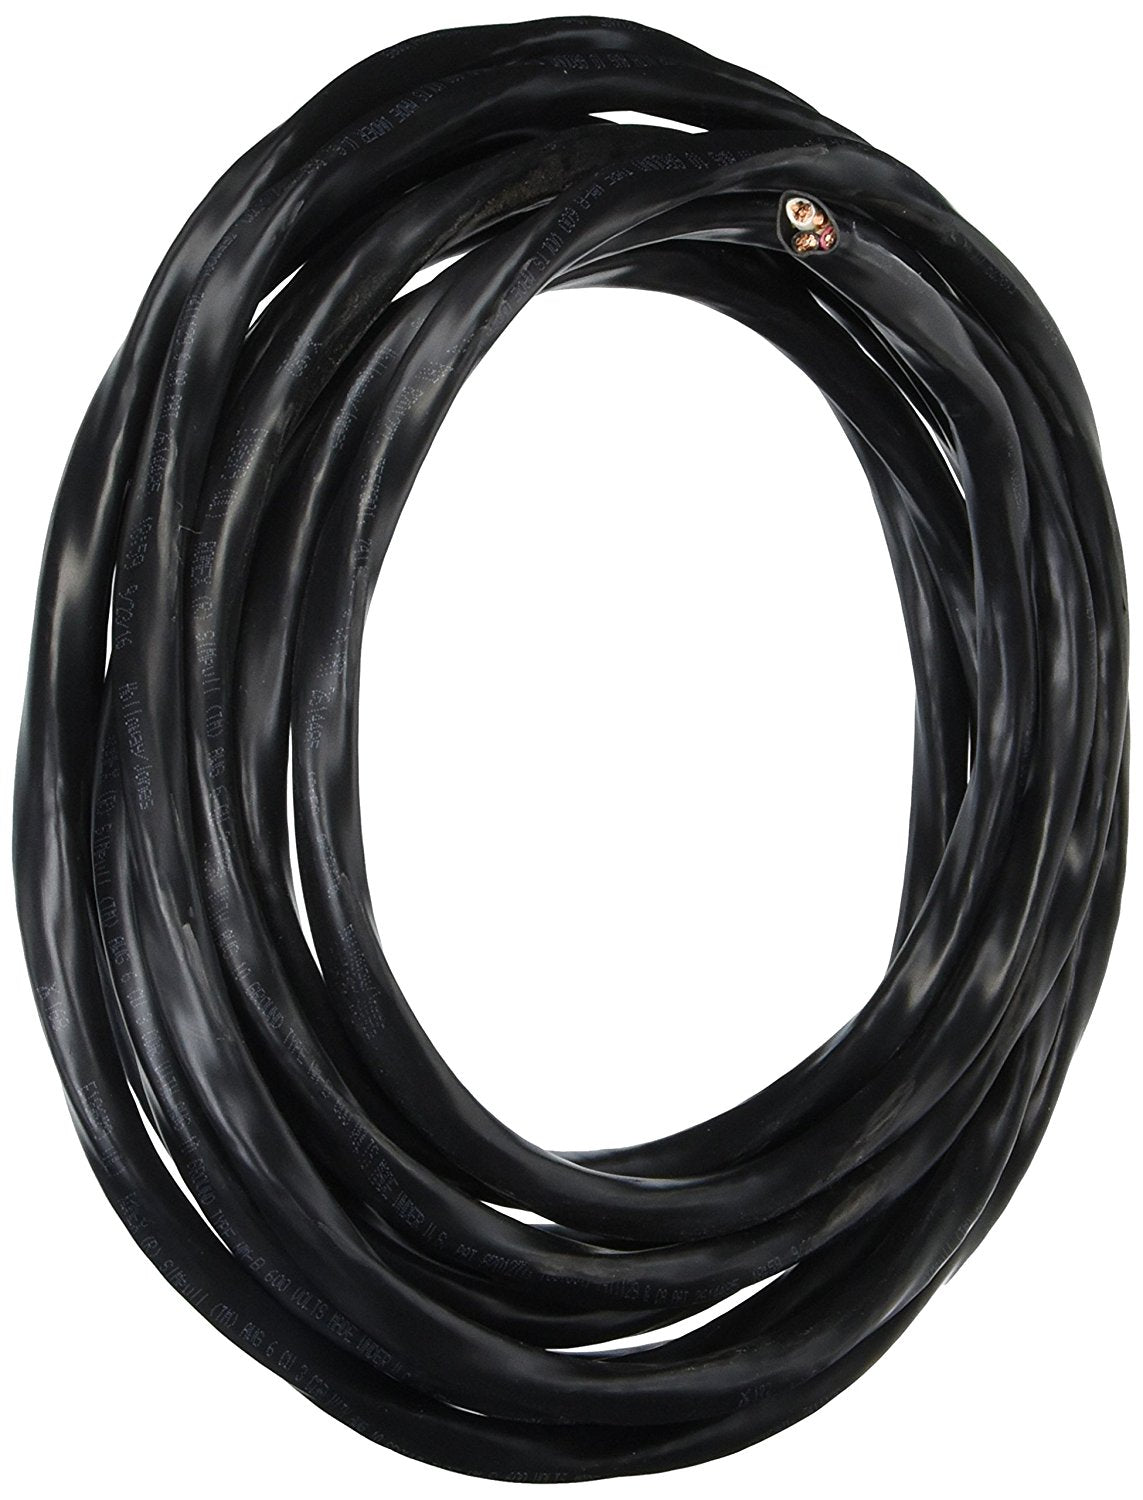 Southwire 63950021 Building Wire, Black, 55 Amp, 25'